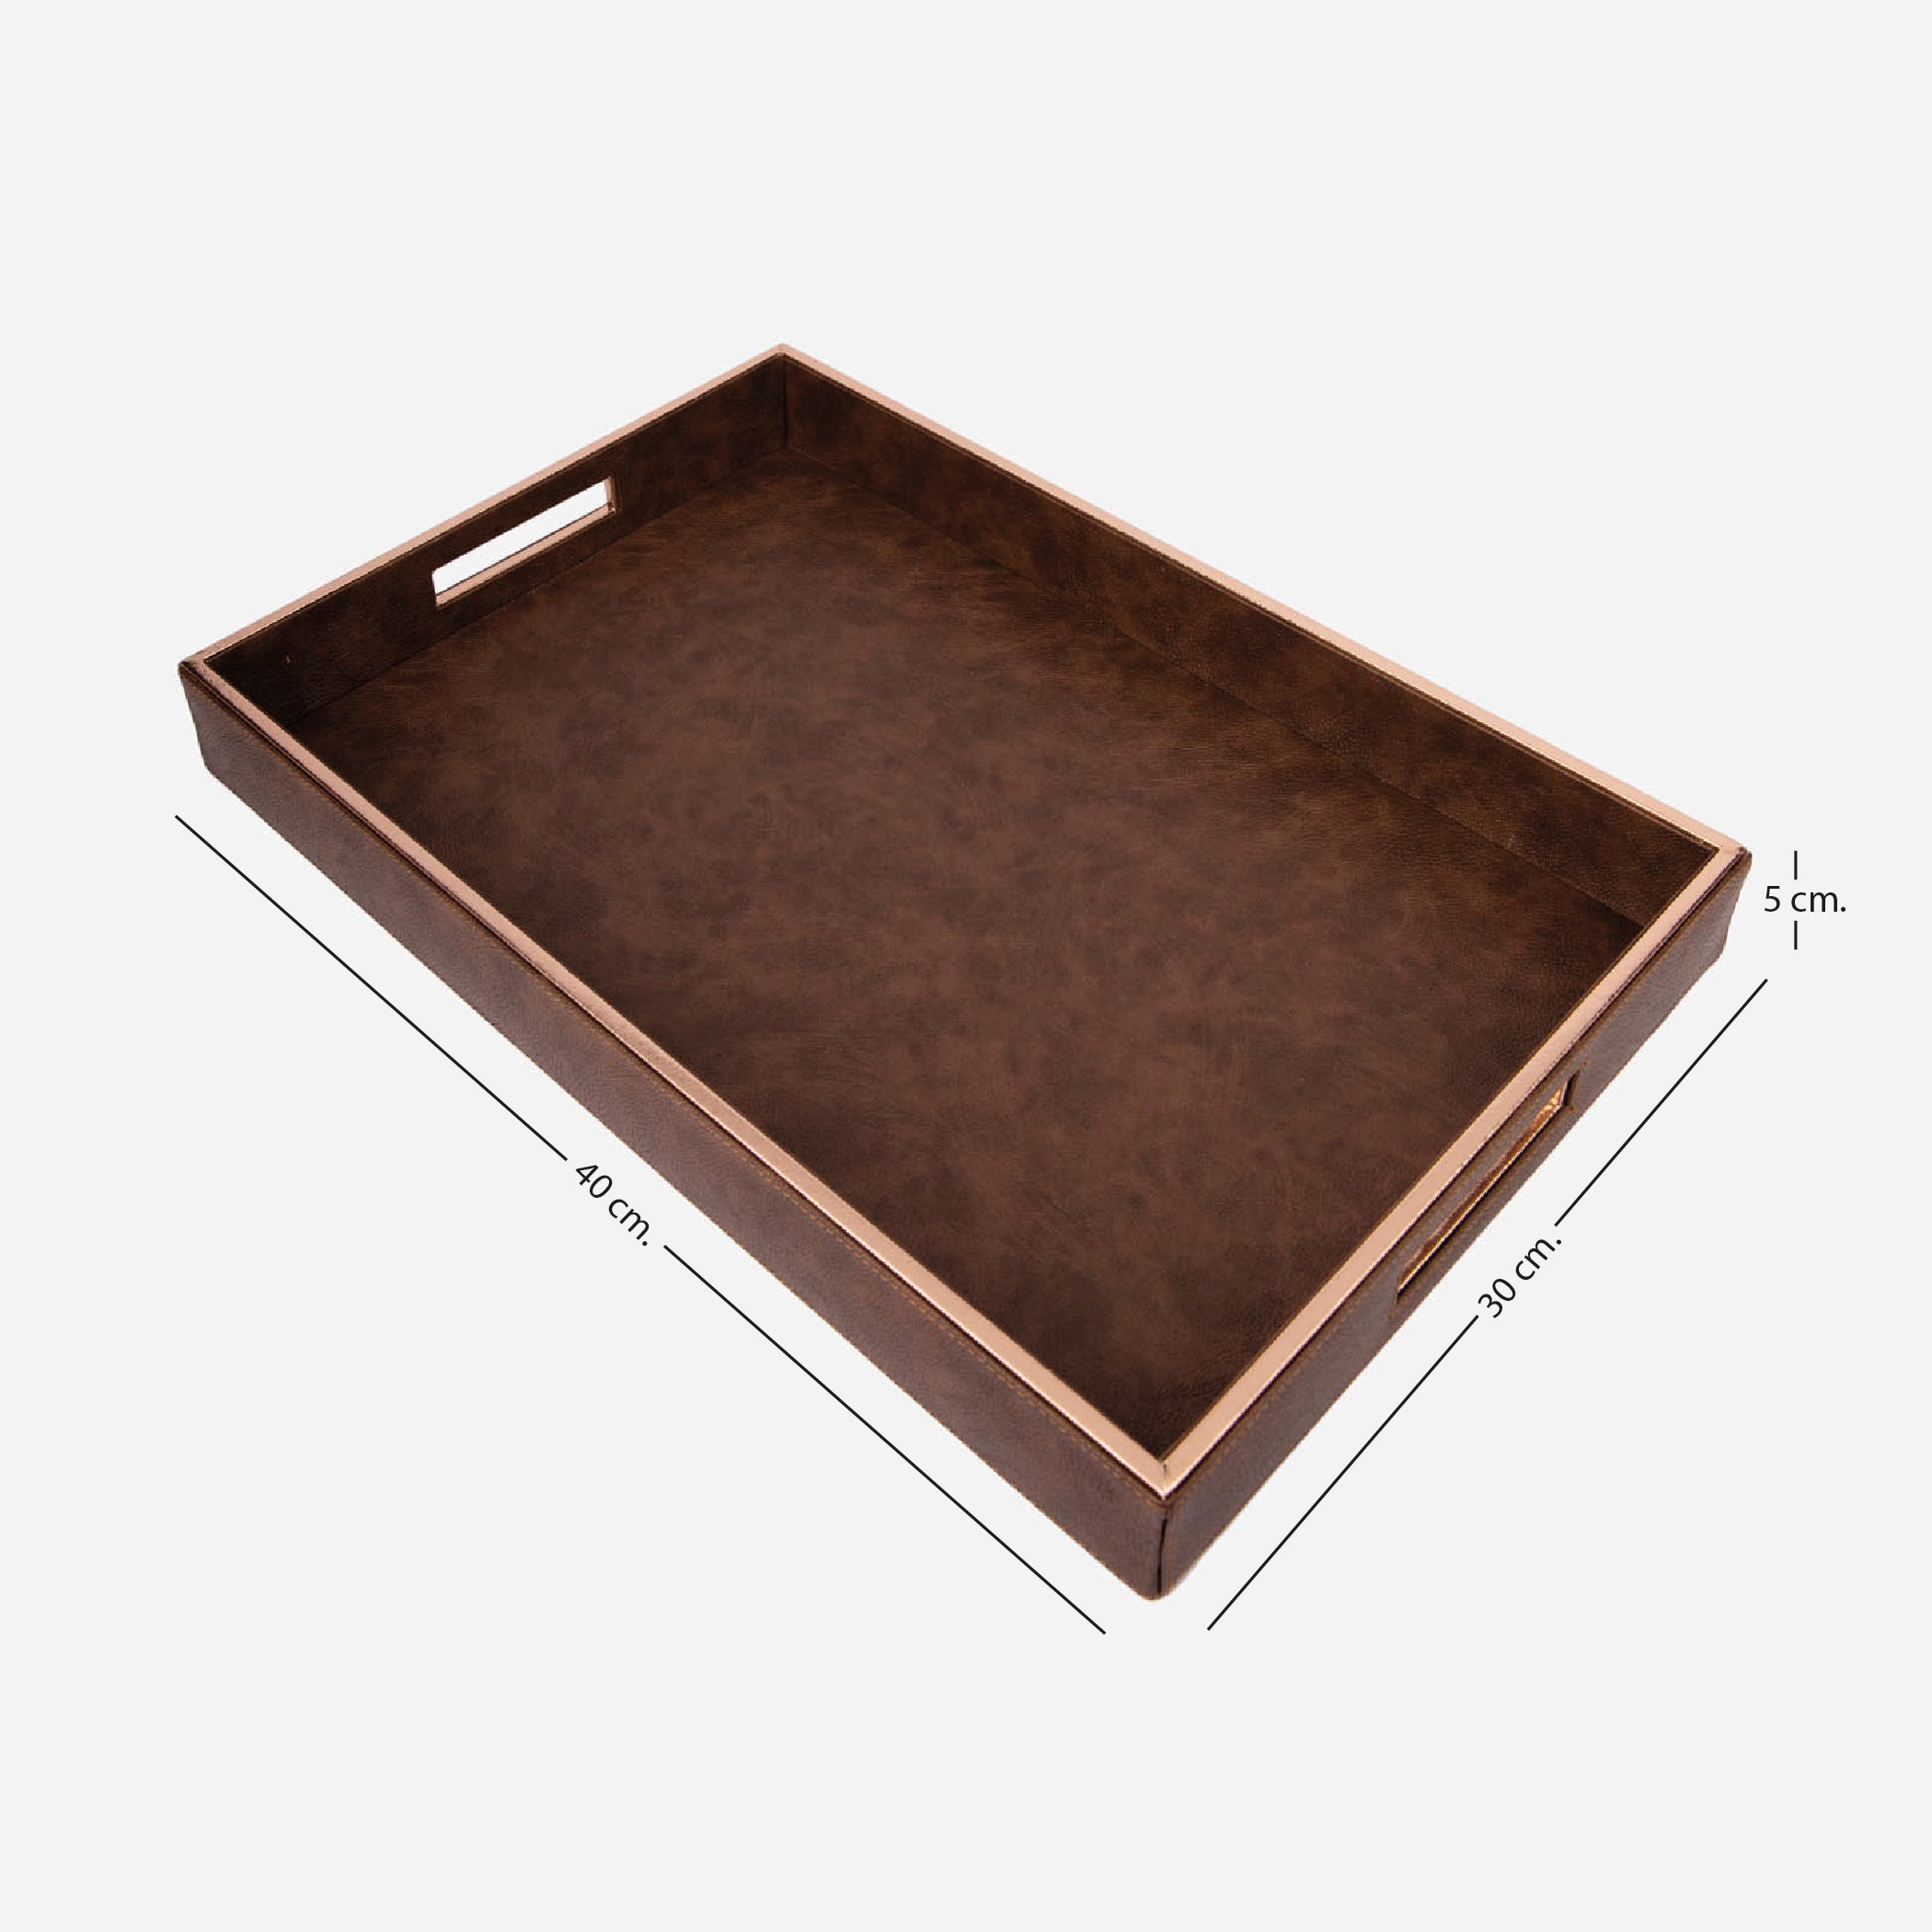 Vegan Leather Tray and Royal Desk Set- Brown With Rose Gold